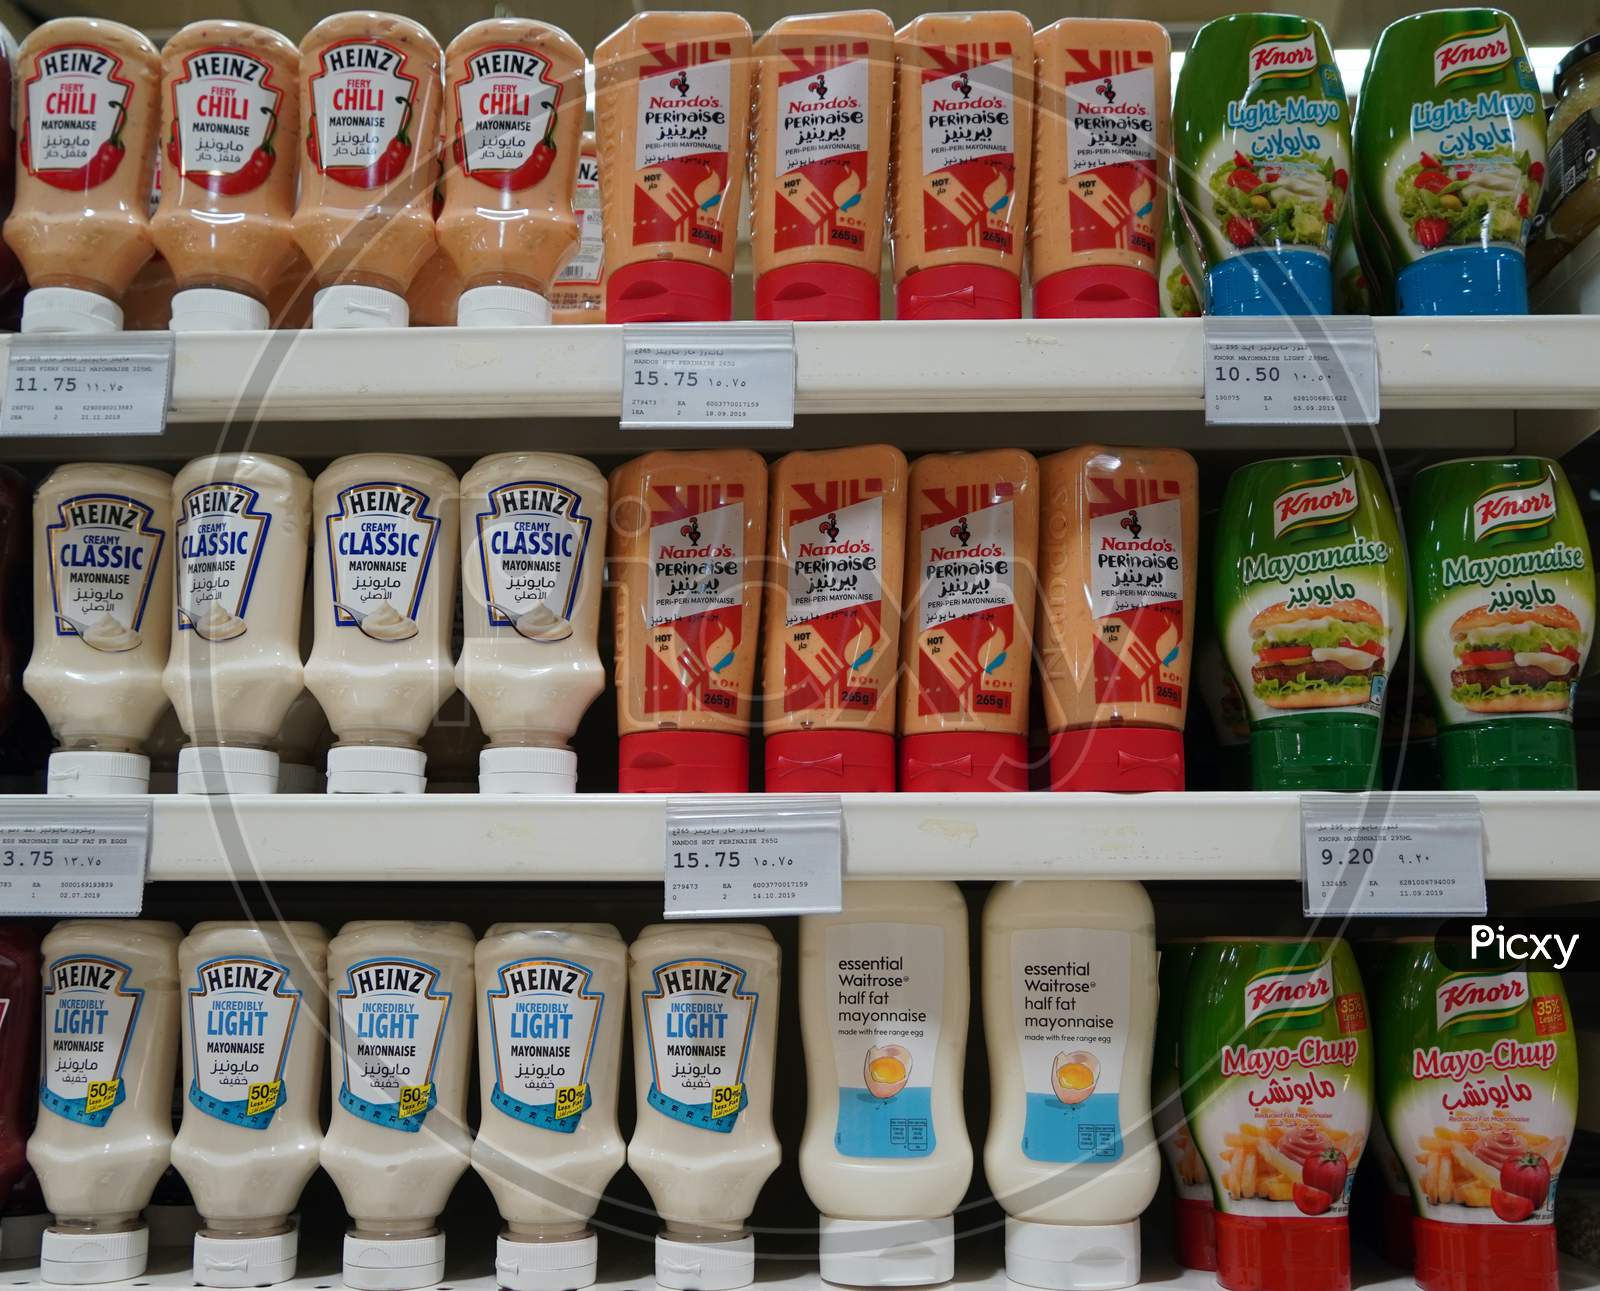 Variety Of Heinz, Knorr Nandos Brand Tomato Ketchup And Mayonnaise Display In Store For Sale. Light Mayo, Chilli Mayo Sauce. Bottles Of Various Sauces On Shelves. India